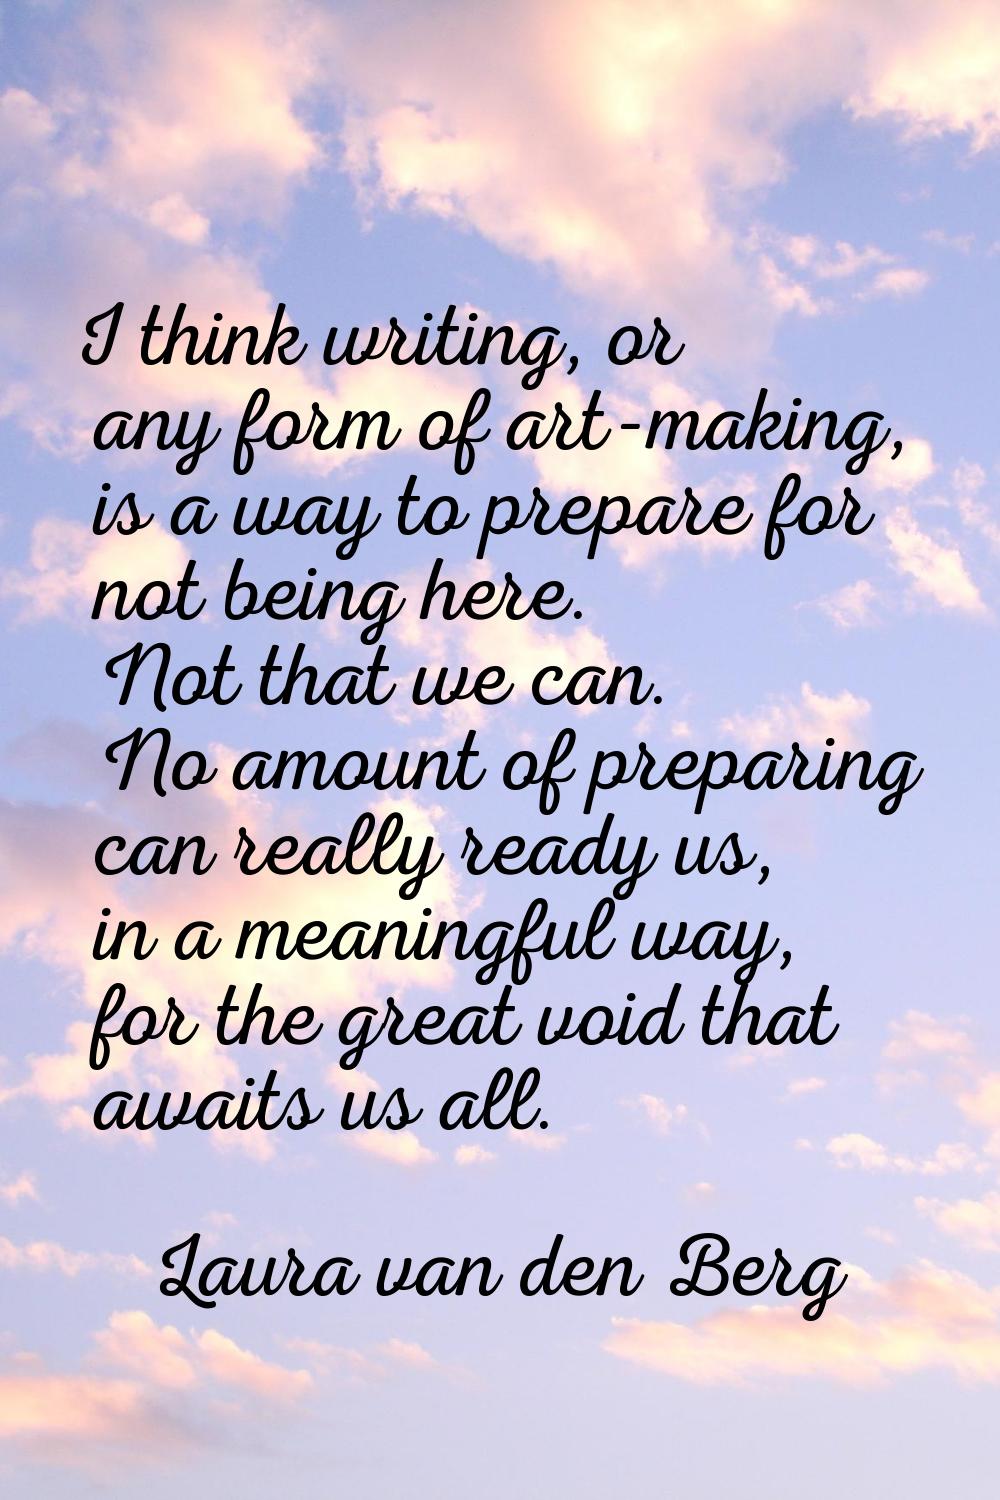 I think writing, or any form of art-making, is a way to prepare for not being here. Not that we can